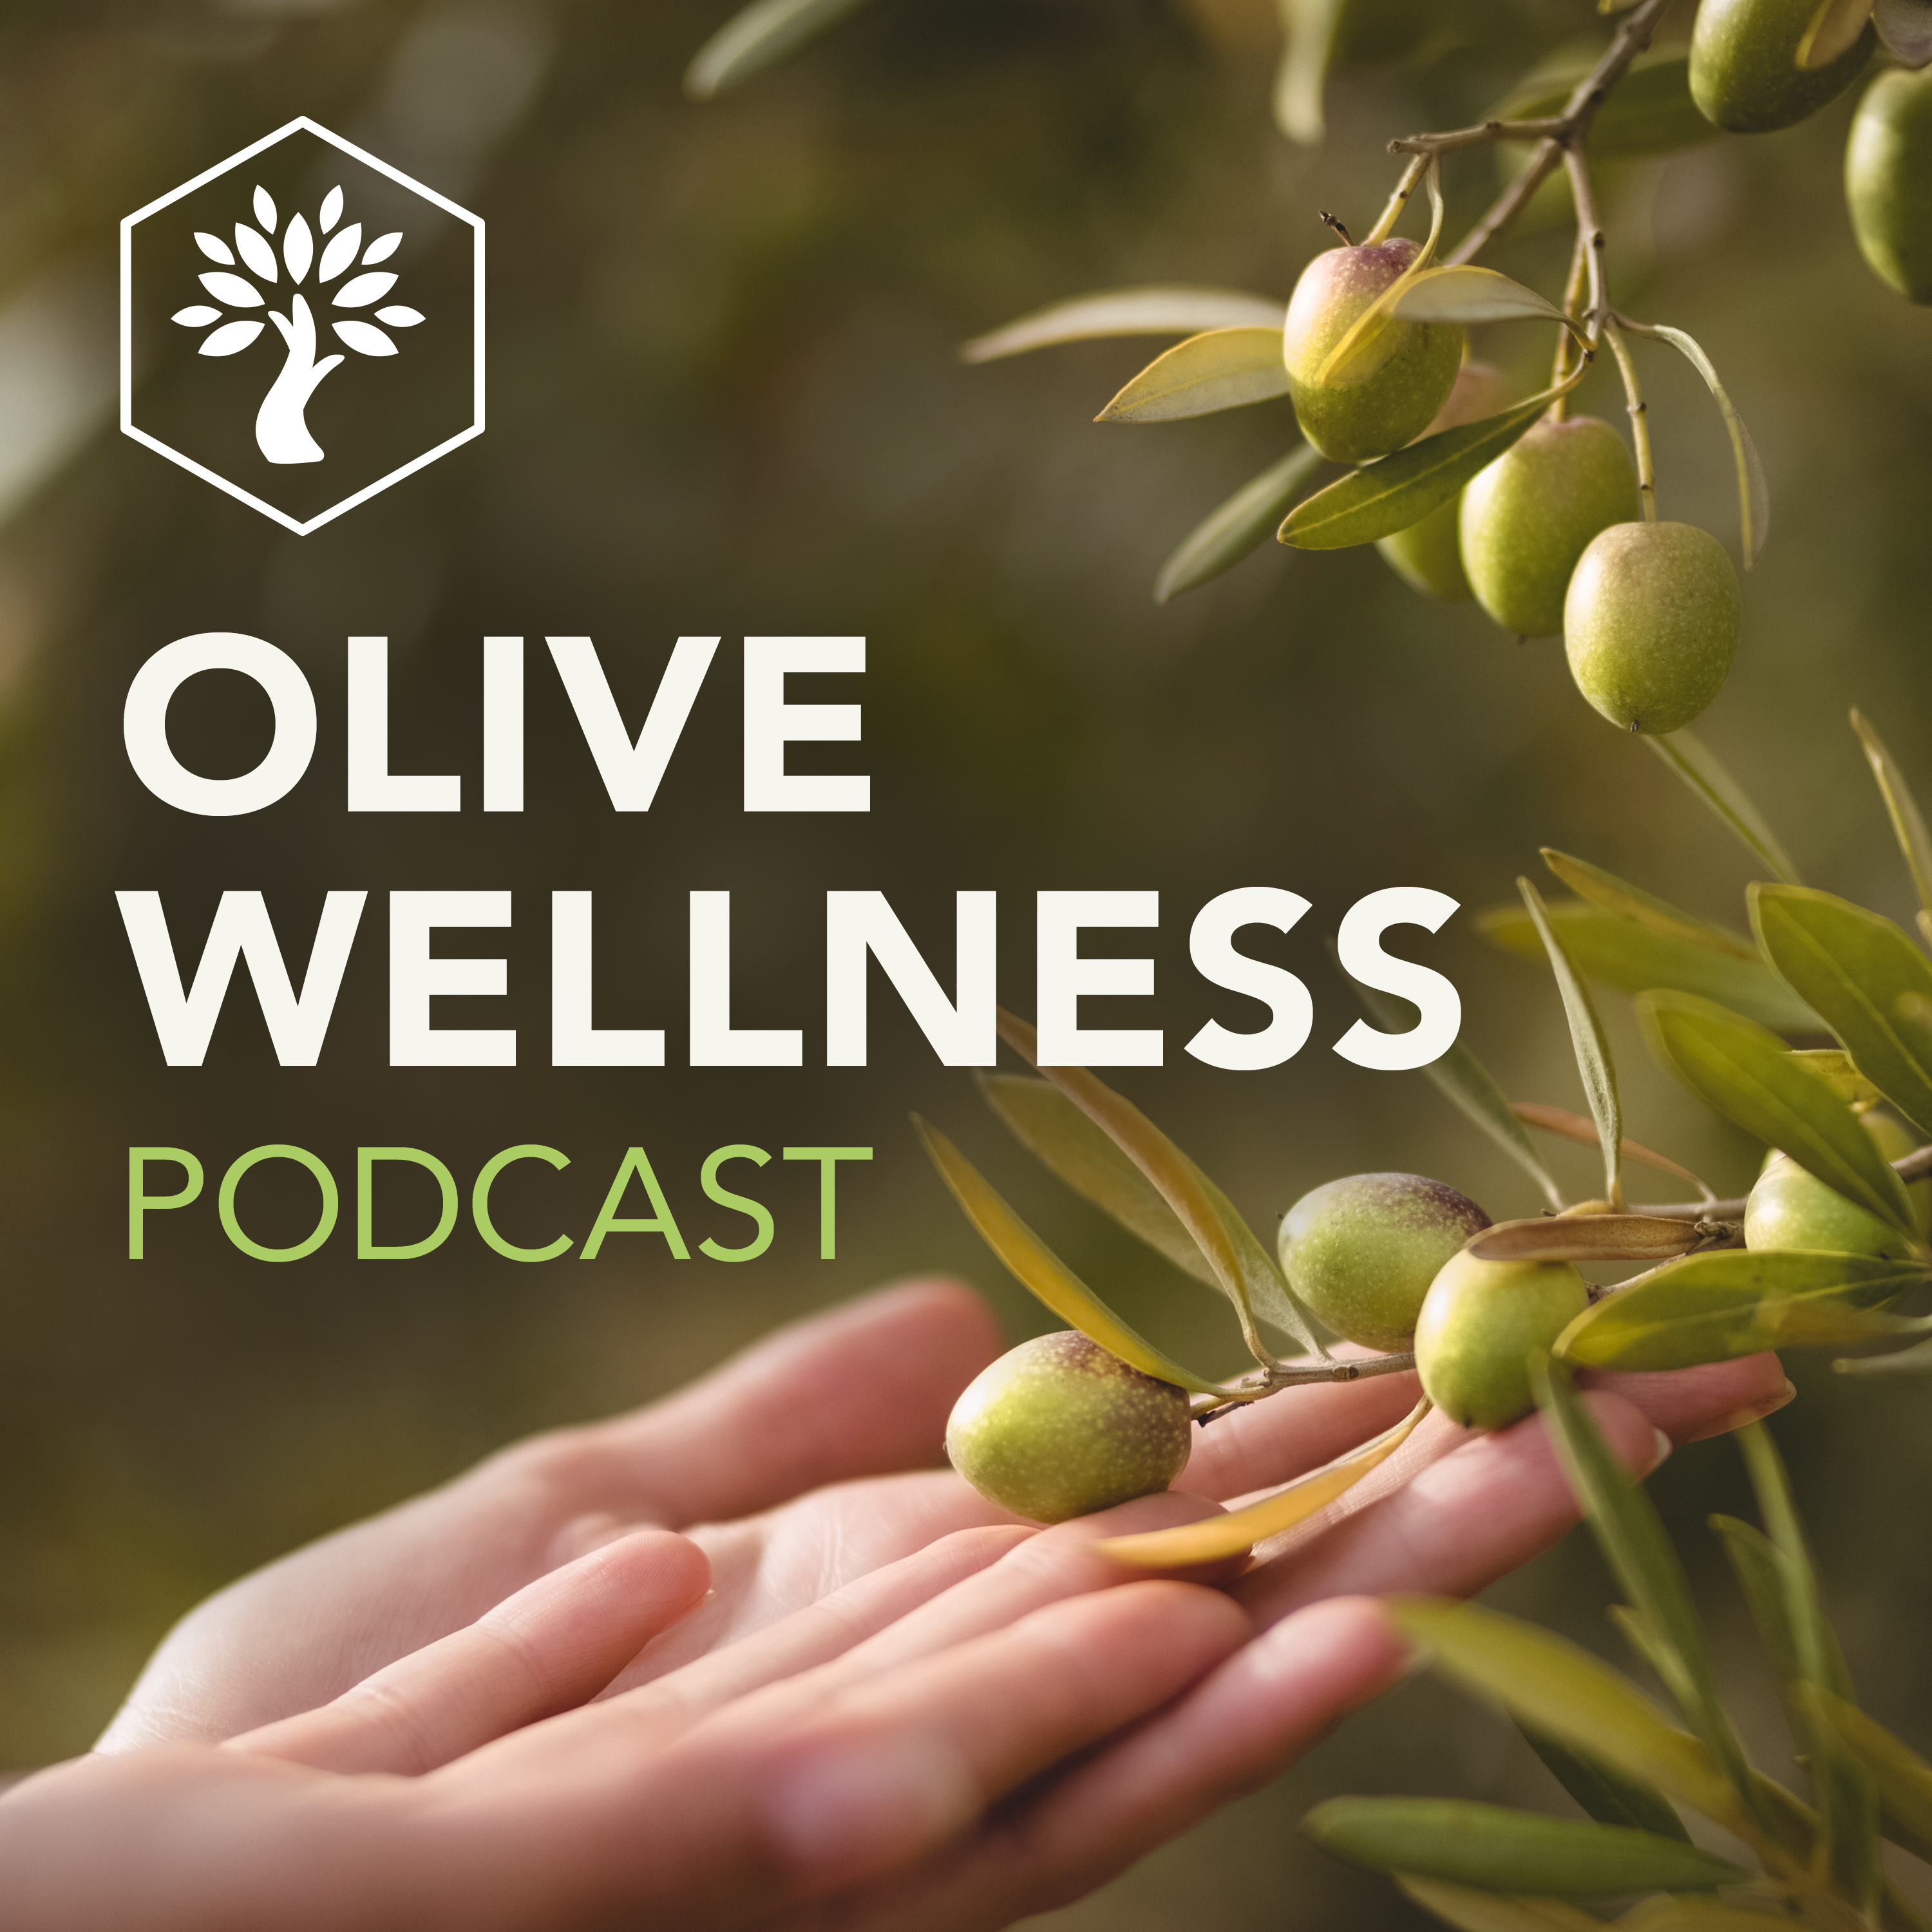 How growers are sustainably using the olive tree